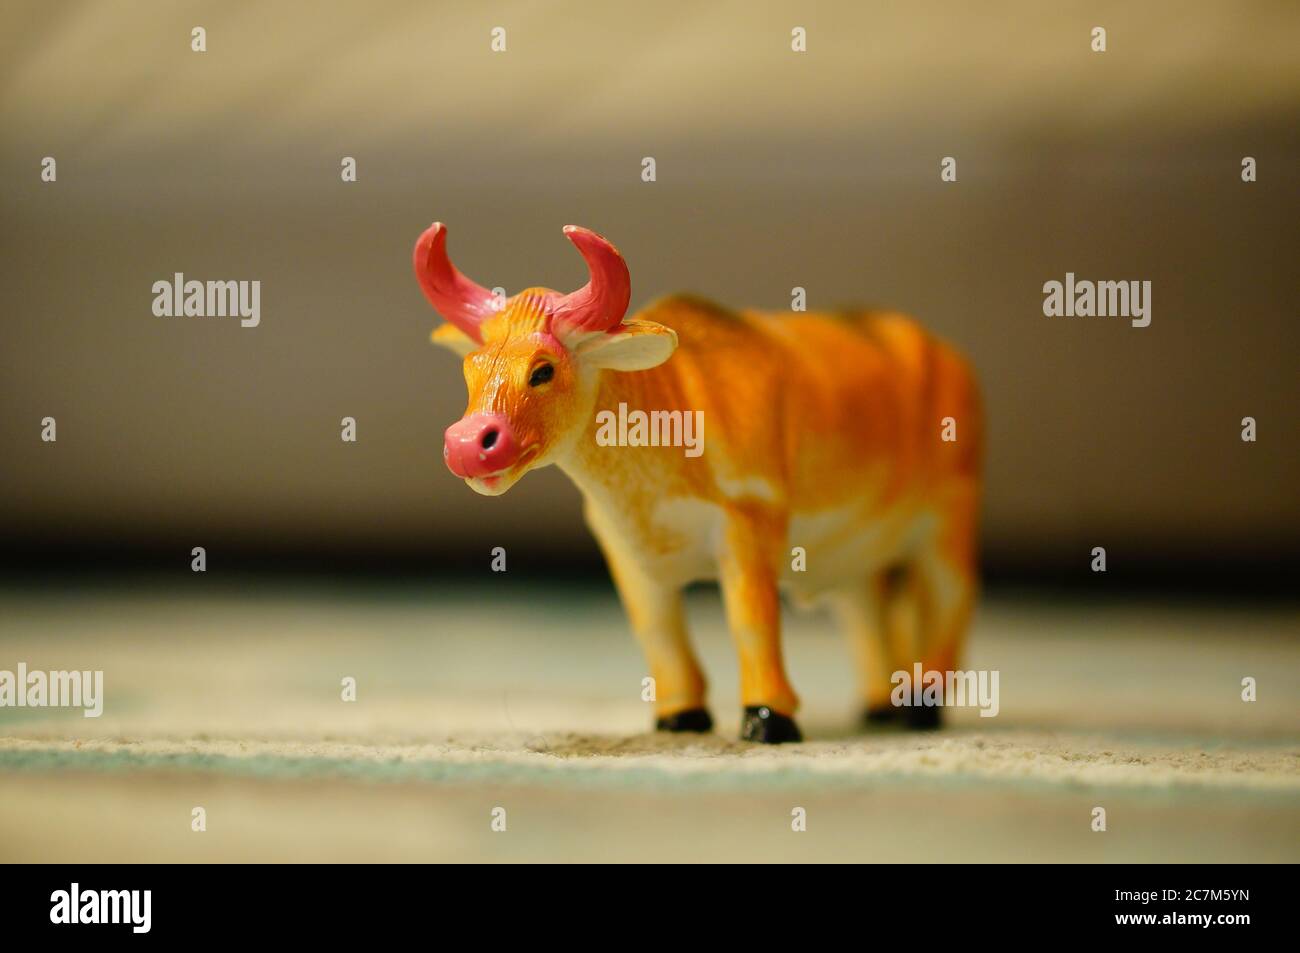 Closeup shot of a toy of a bull in a room Stock Photo